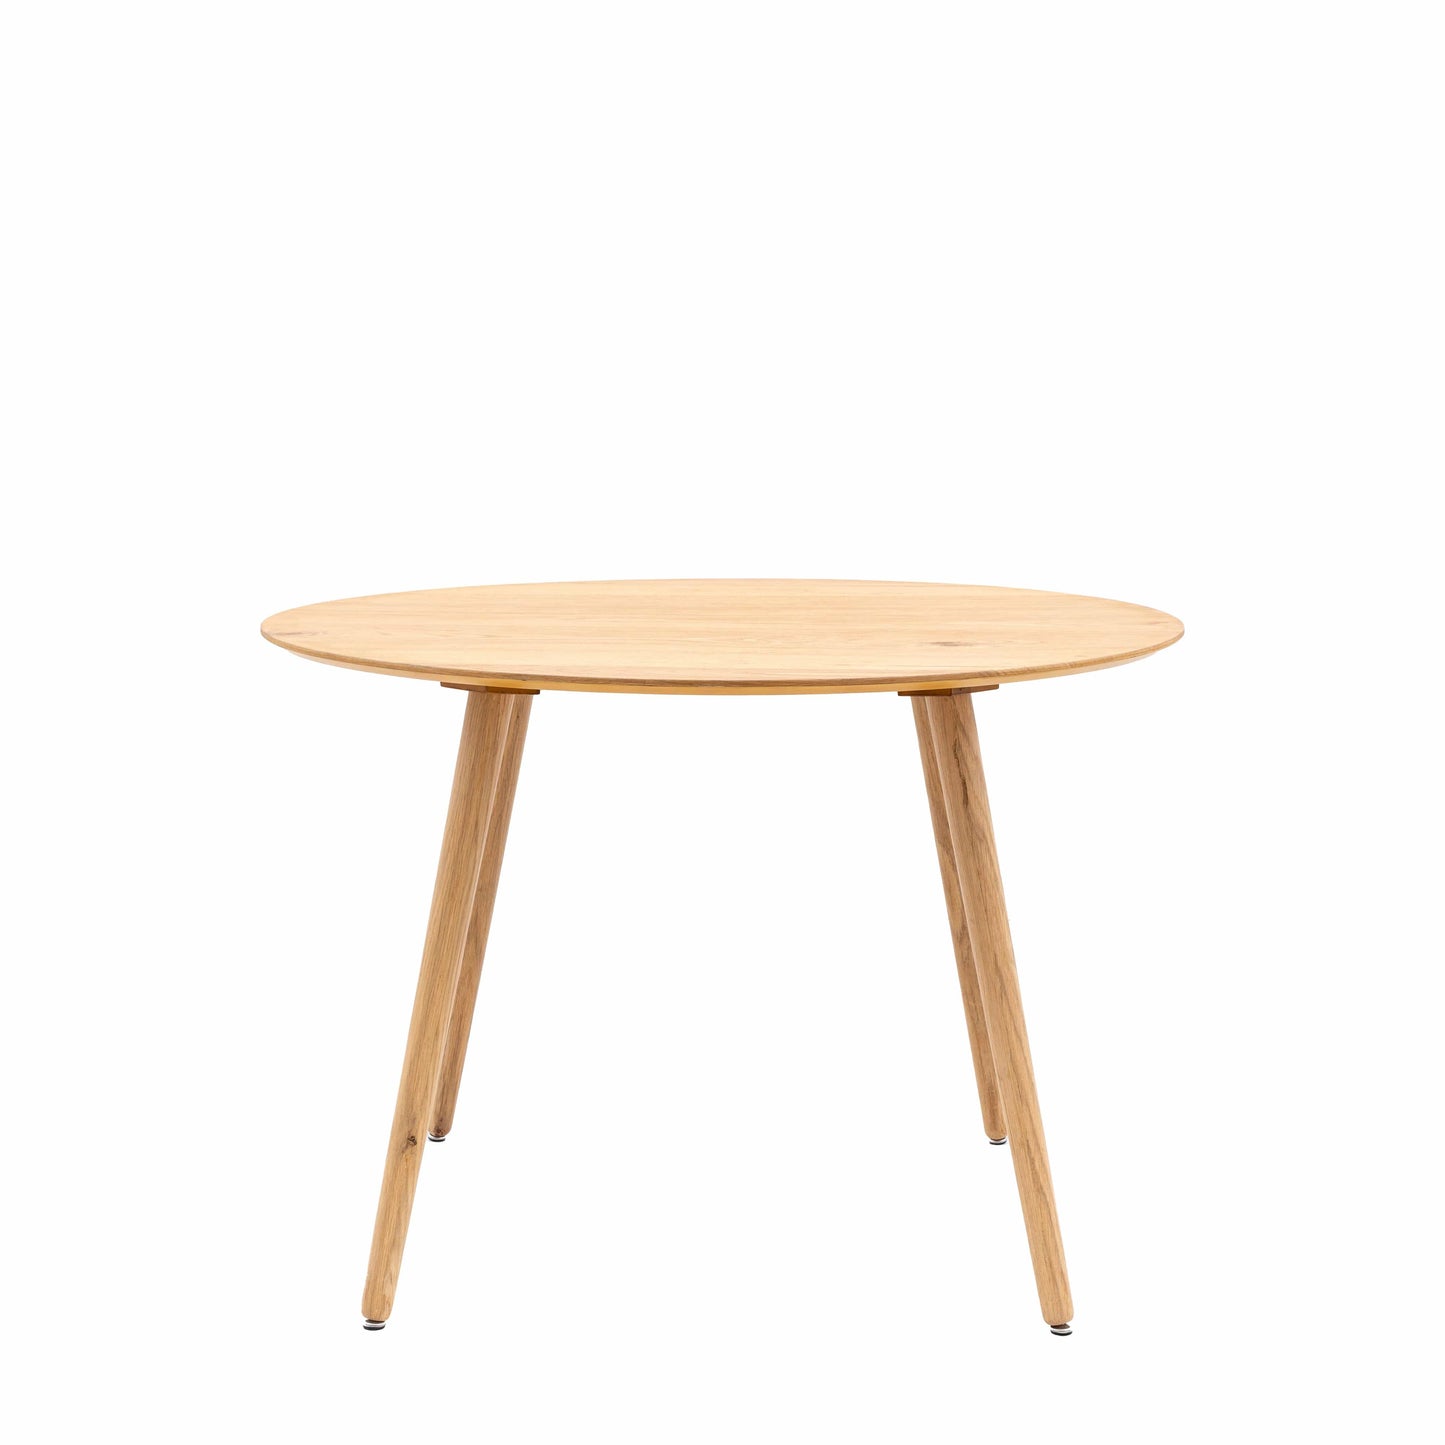 Hatfield Round Dining Table - Colour Options